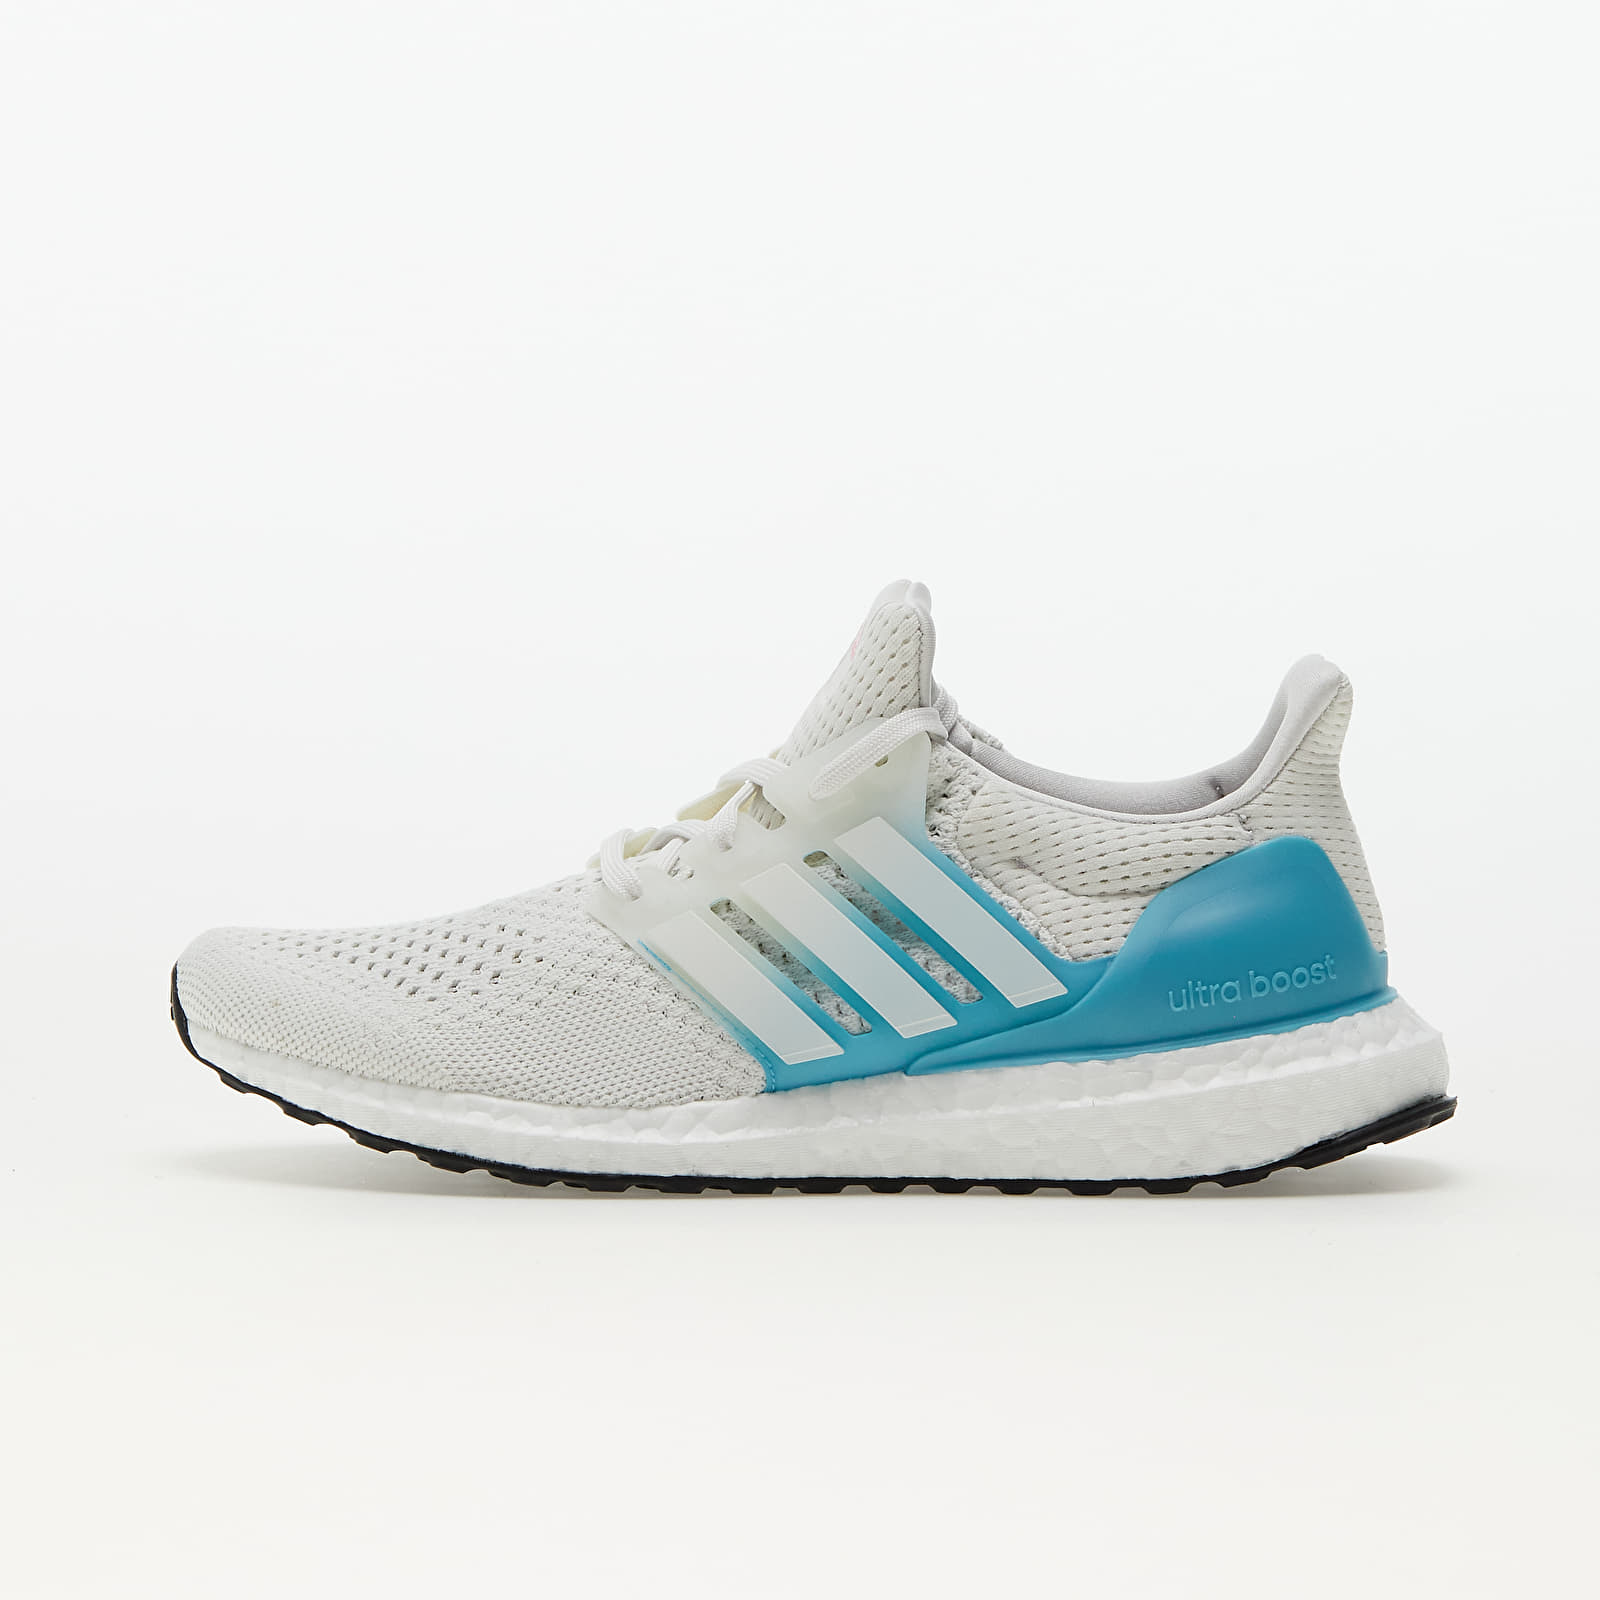 Women's shoes adidas UltraBOOST 1.0 W Crystal White/ Crystal White/ Preloved Blue